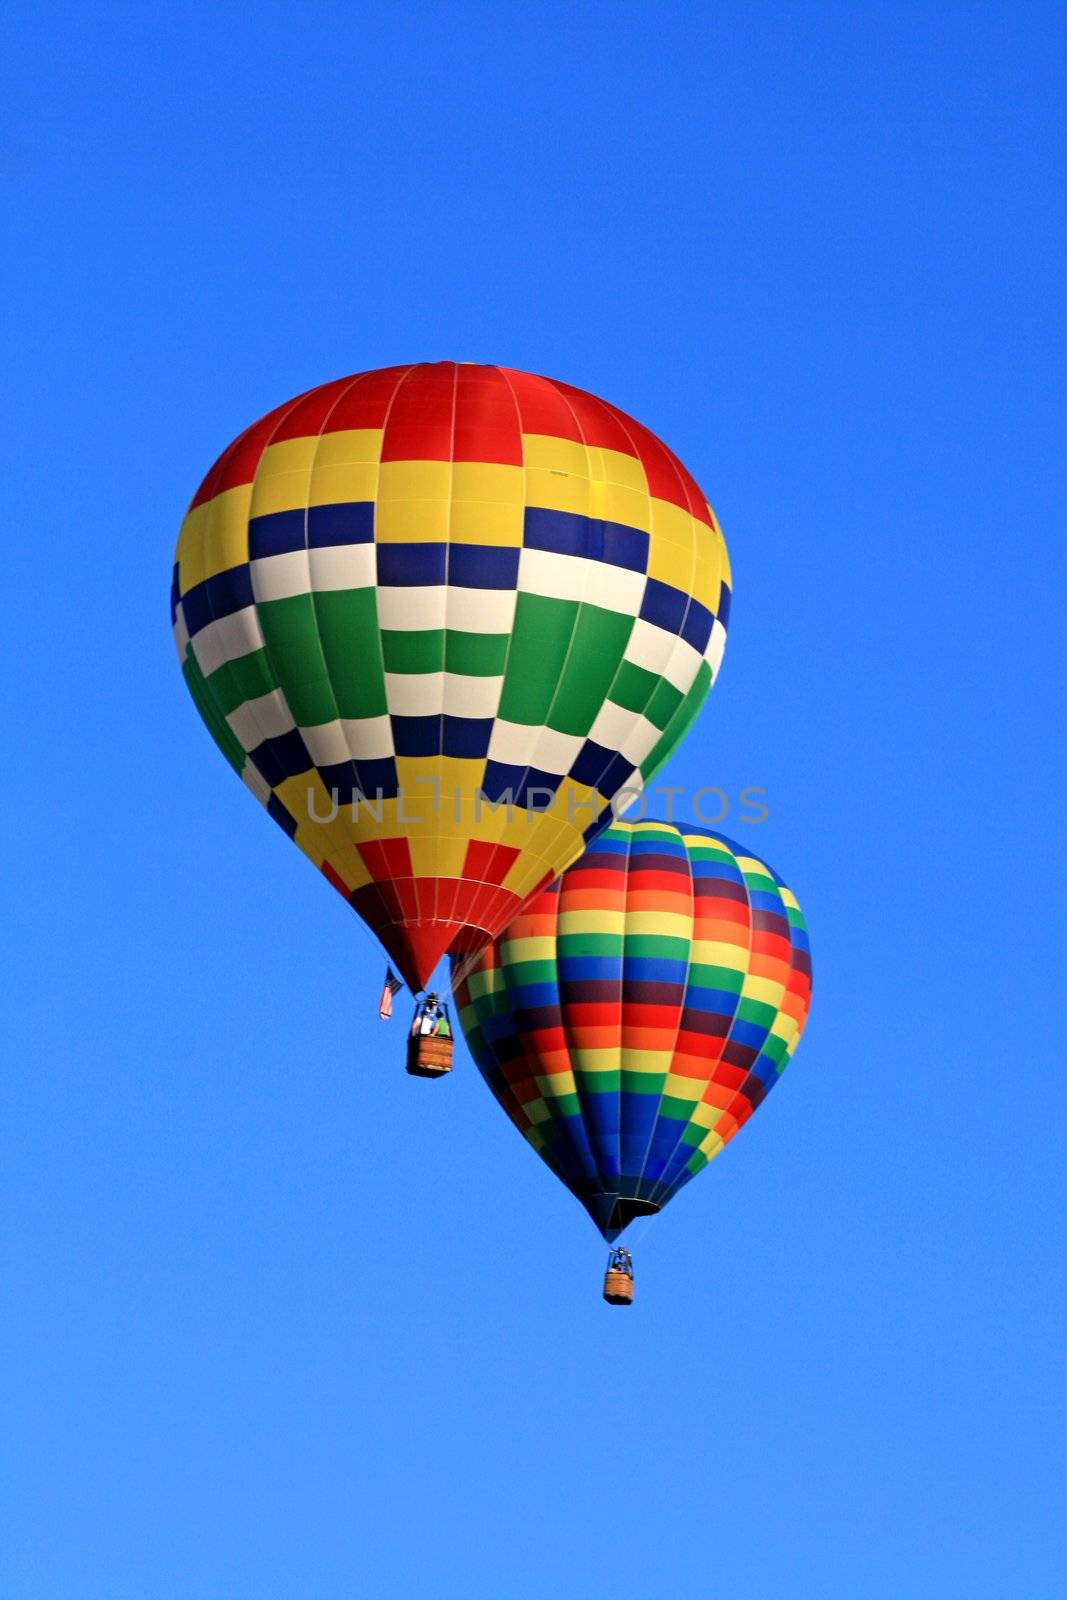 A balloon festival in New Jersey USA